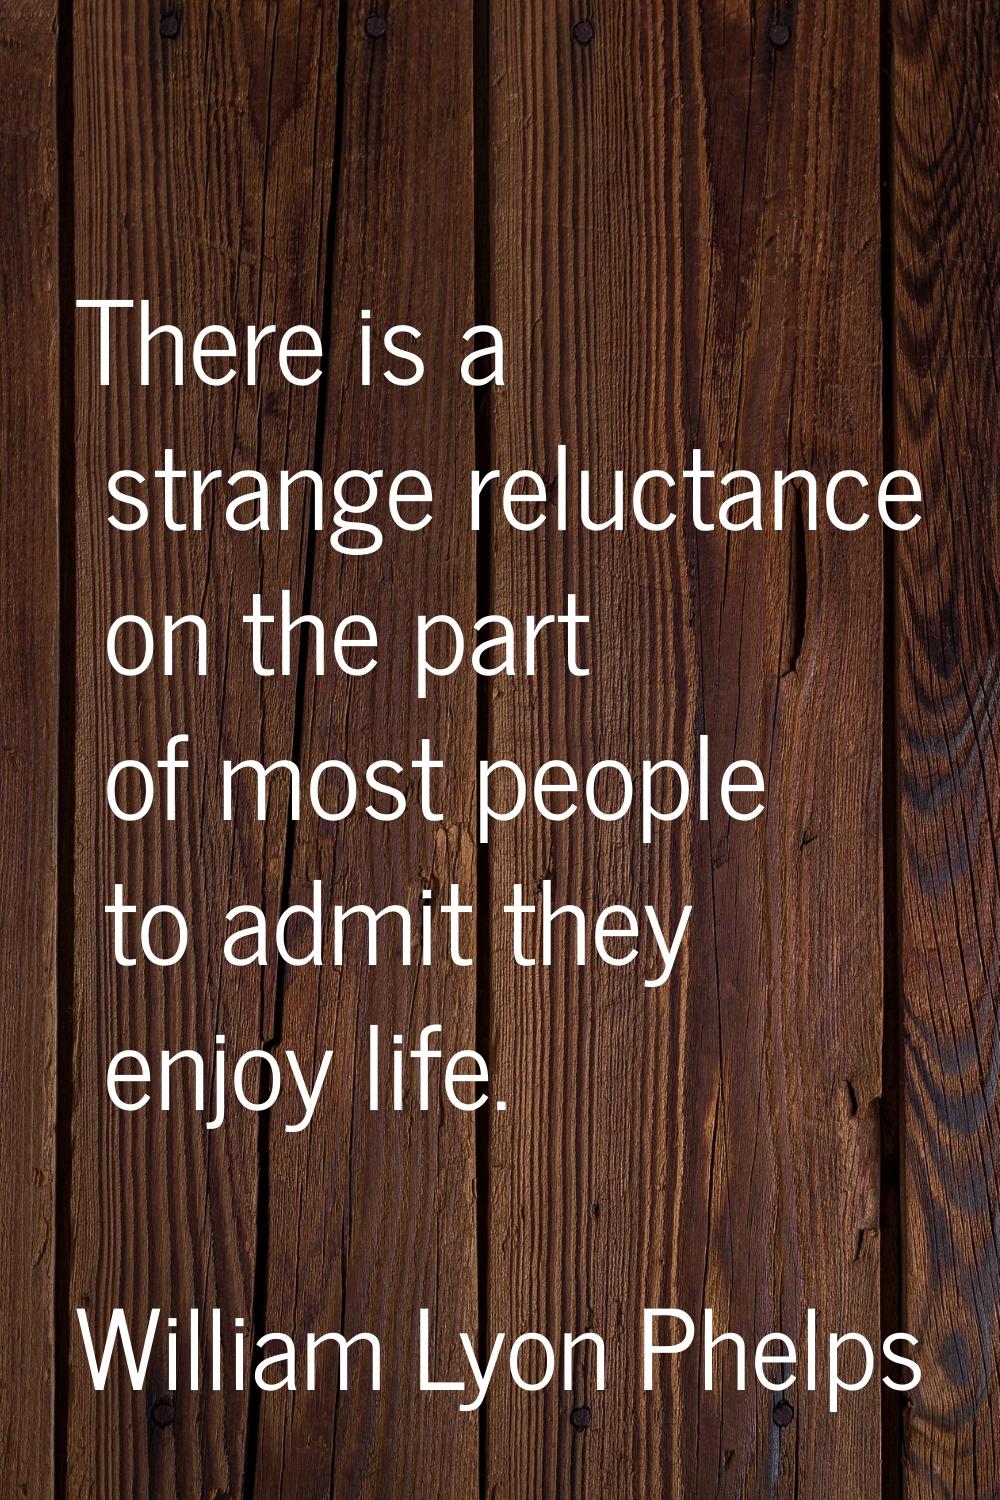 There is a strange reluctance on the part of most people to admit they enjoy life.